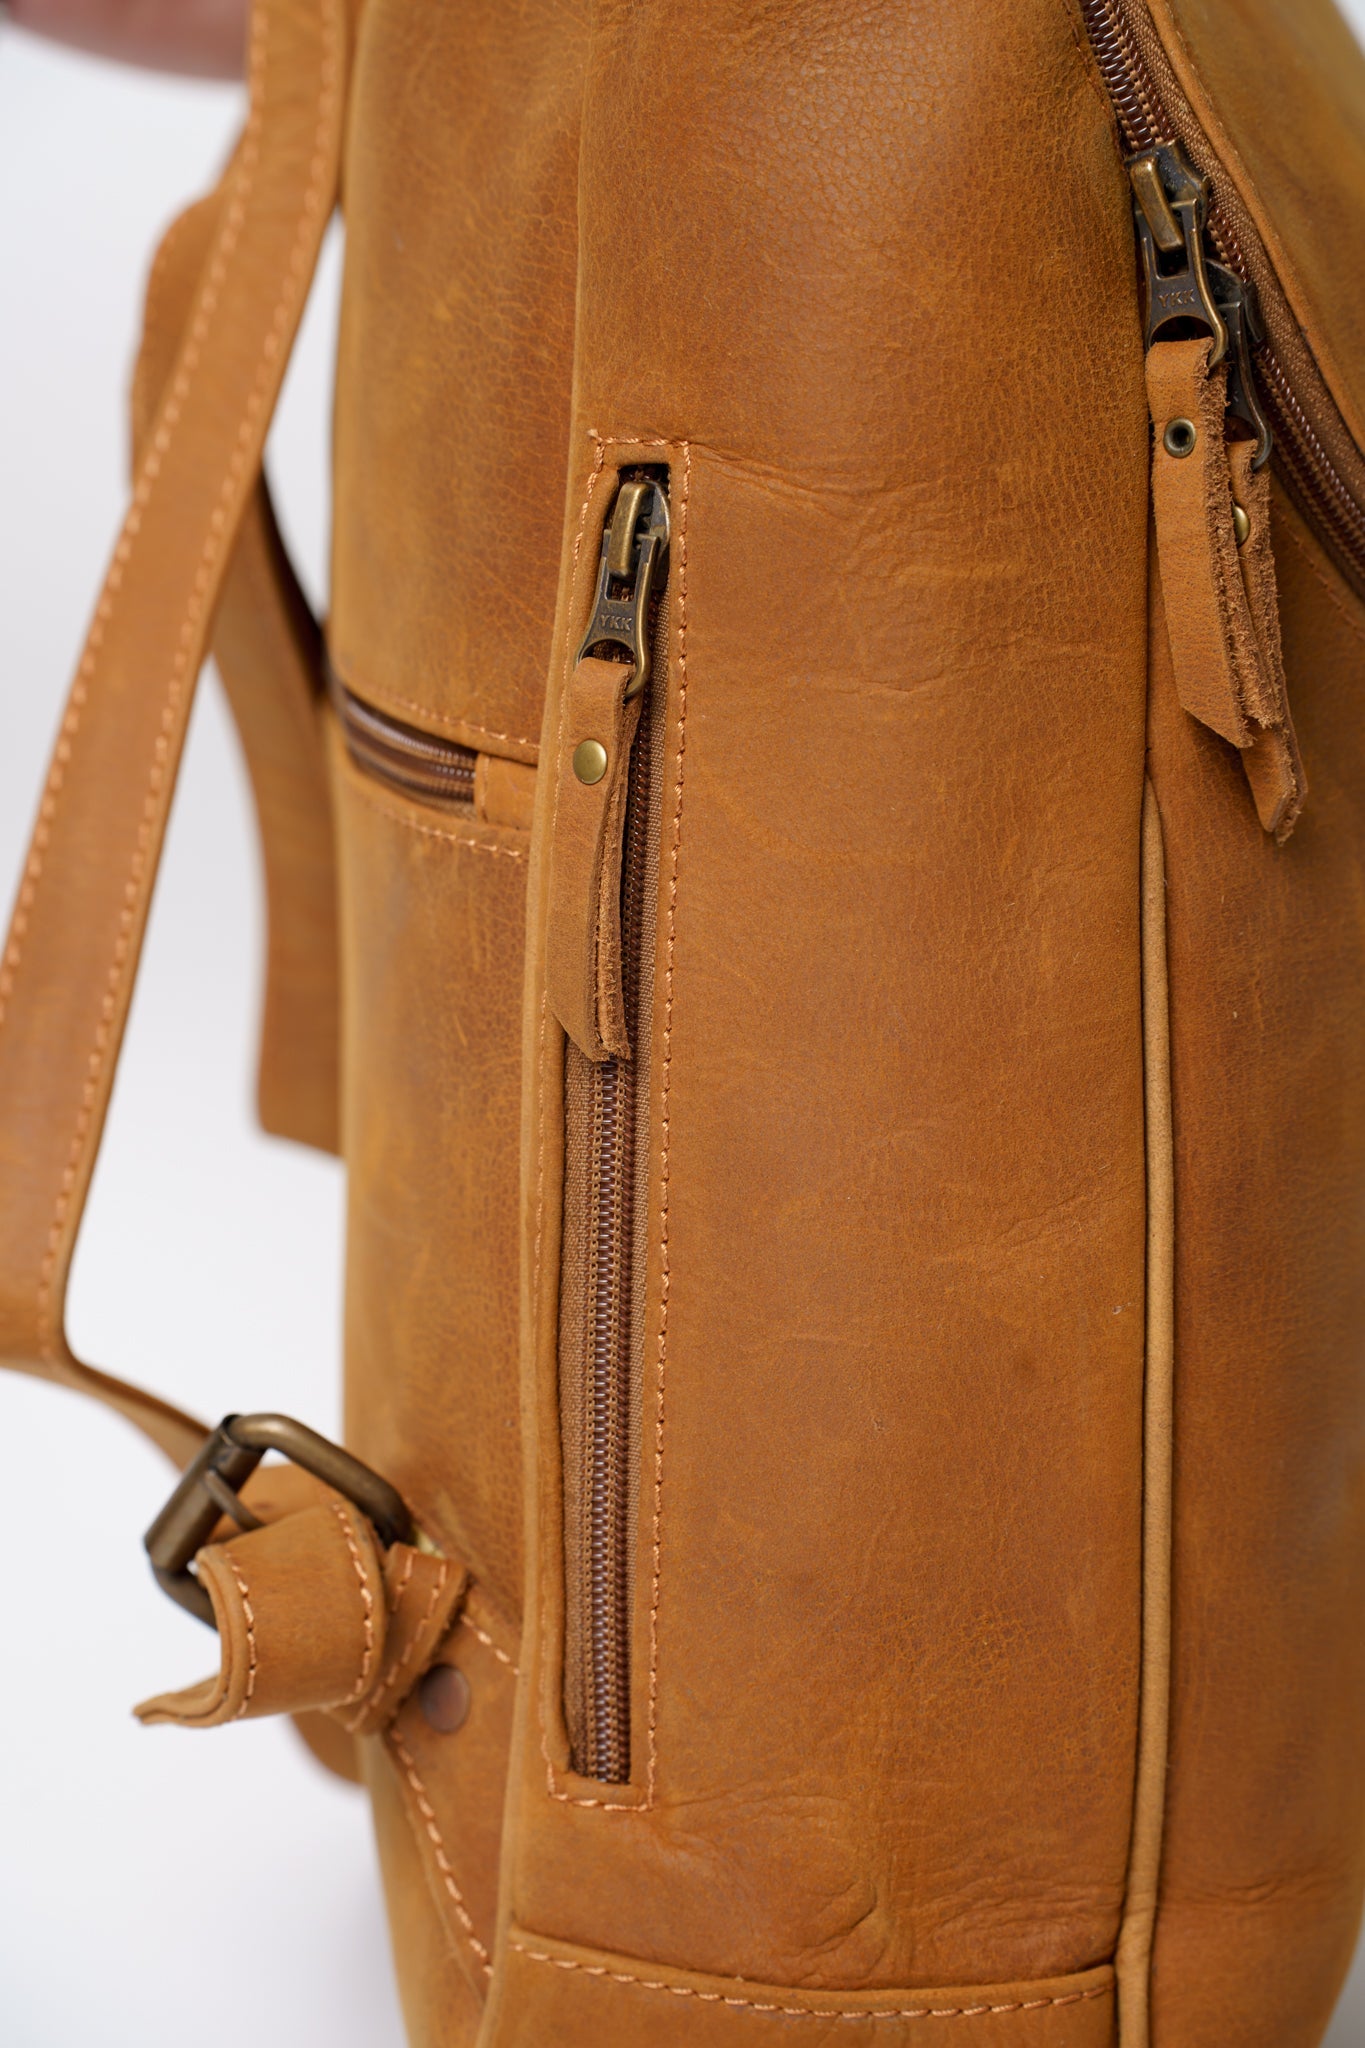 Side view of Chamra's satchel style backpack, showcasing a subtle pocket fit to carry small items like a phone, wallet, passport, or other small items.